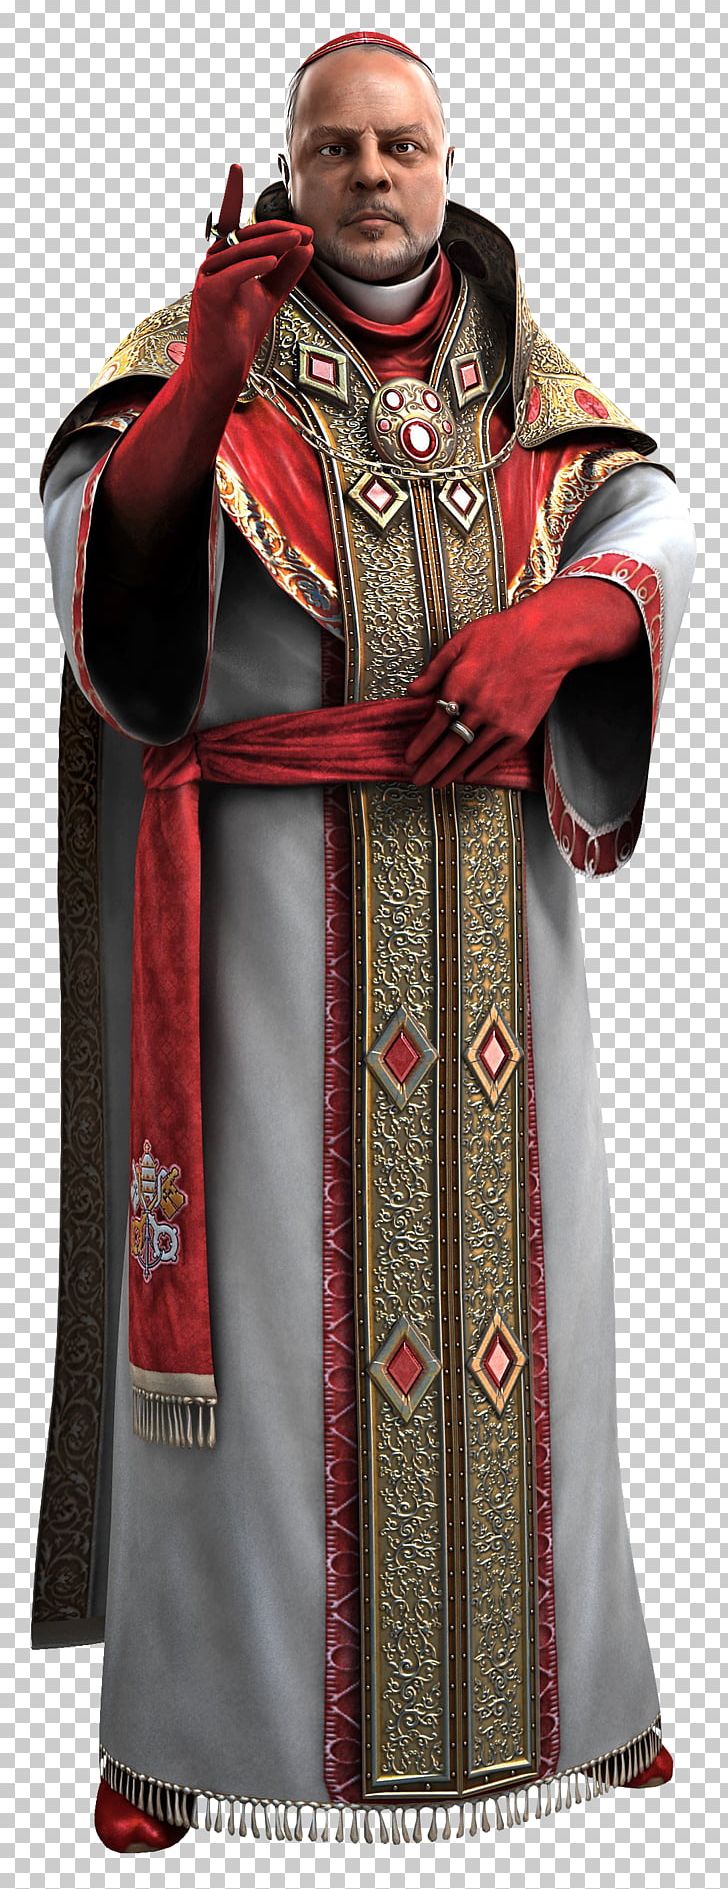 Assassin's Creed: Brotherhood Assassin's Creed II Pope Alexander VI Assassin's Creed: Revelations PNG, Clipart, Assassins, Assassins Creed Brotherhood, Assassins Creed Ii, Assassins Creed Revelations, Assassins Creed Unity Free PNG Download